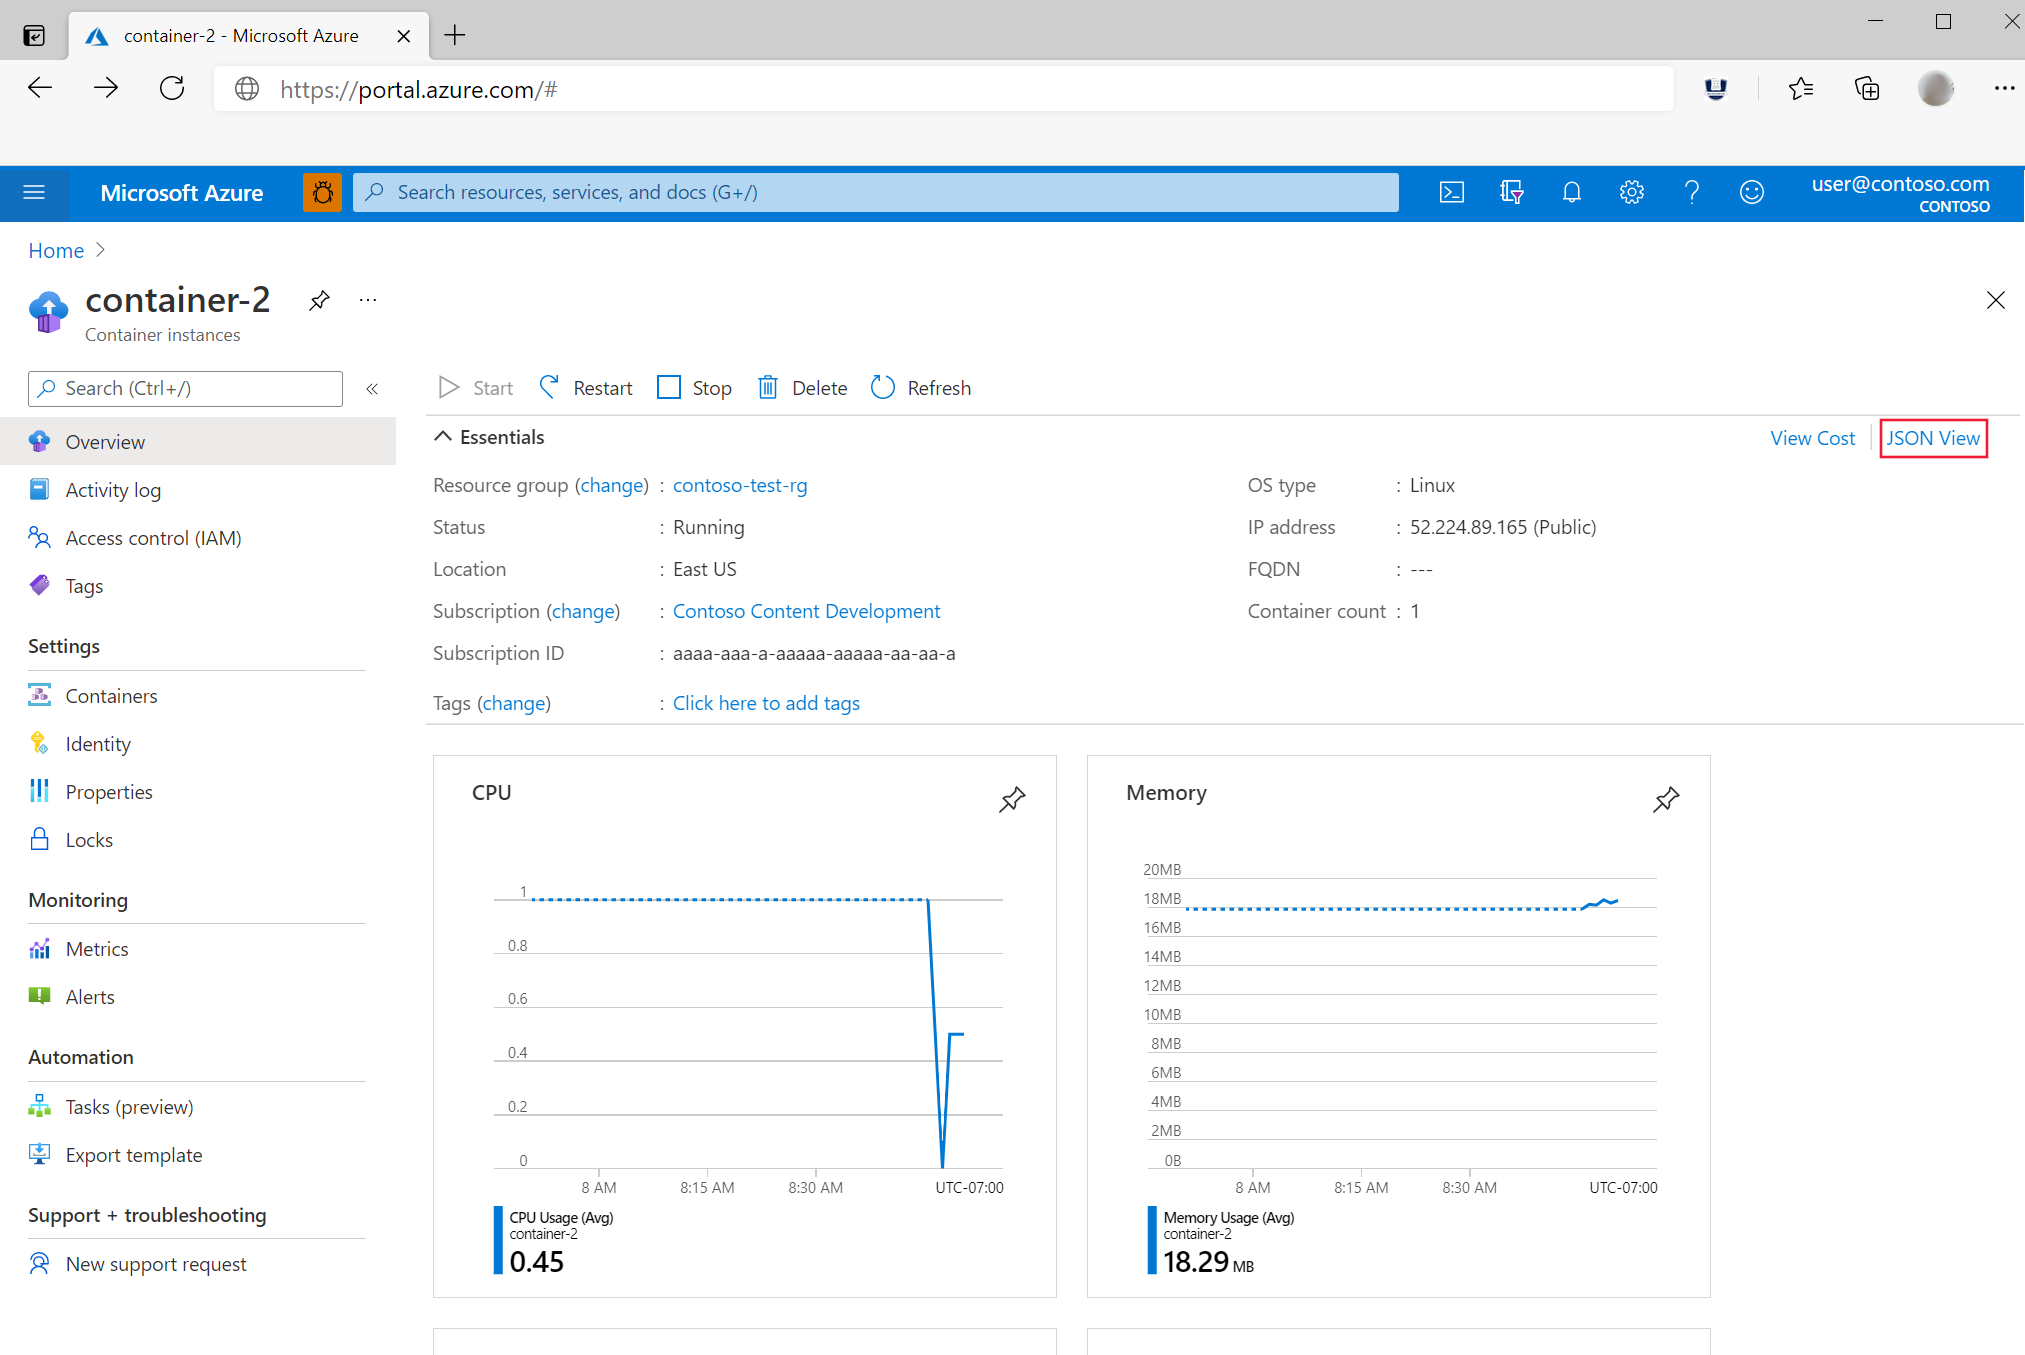 The Overview blade in the Azure portal is shown. The link 'JSON view' is highlighted.